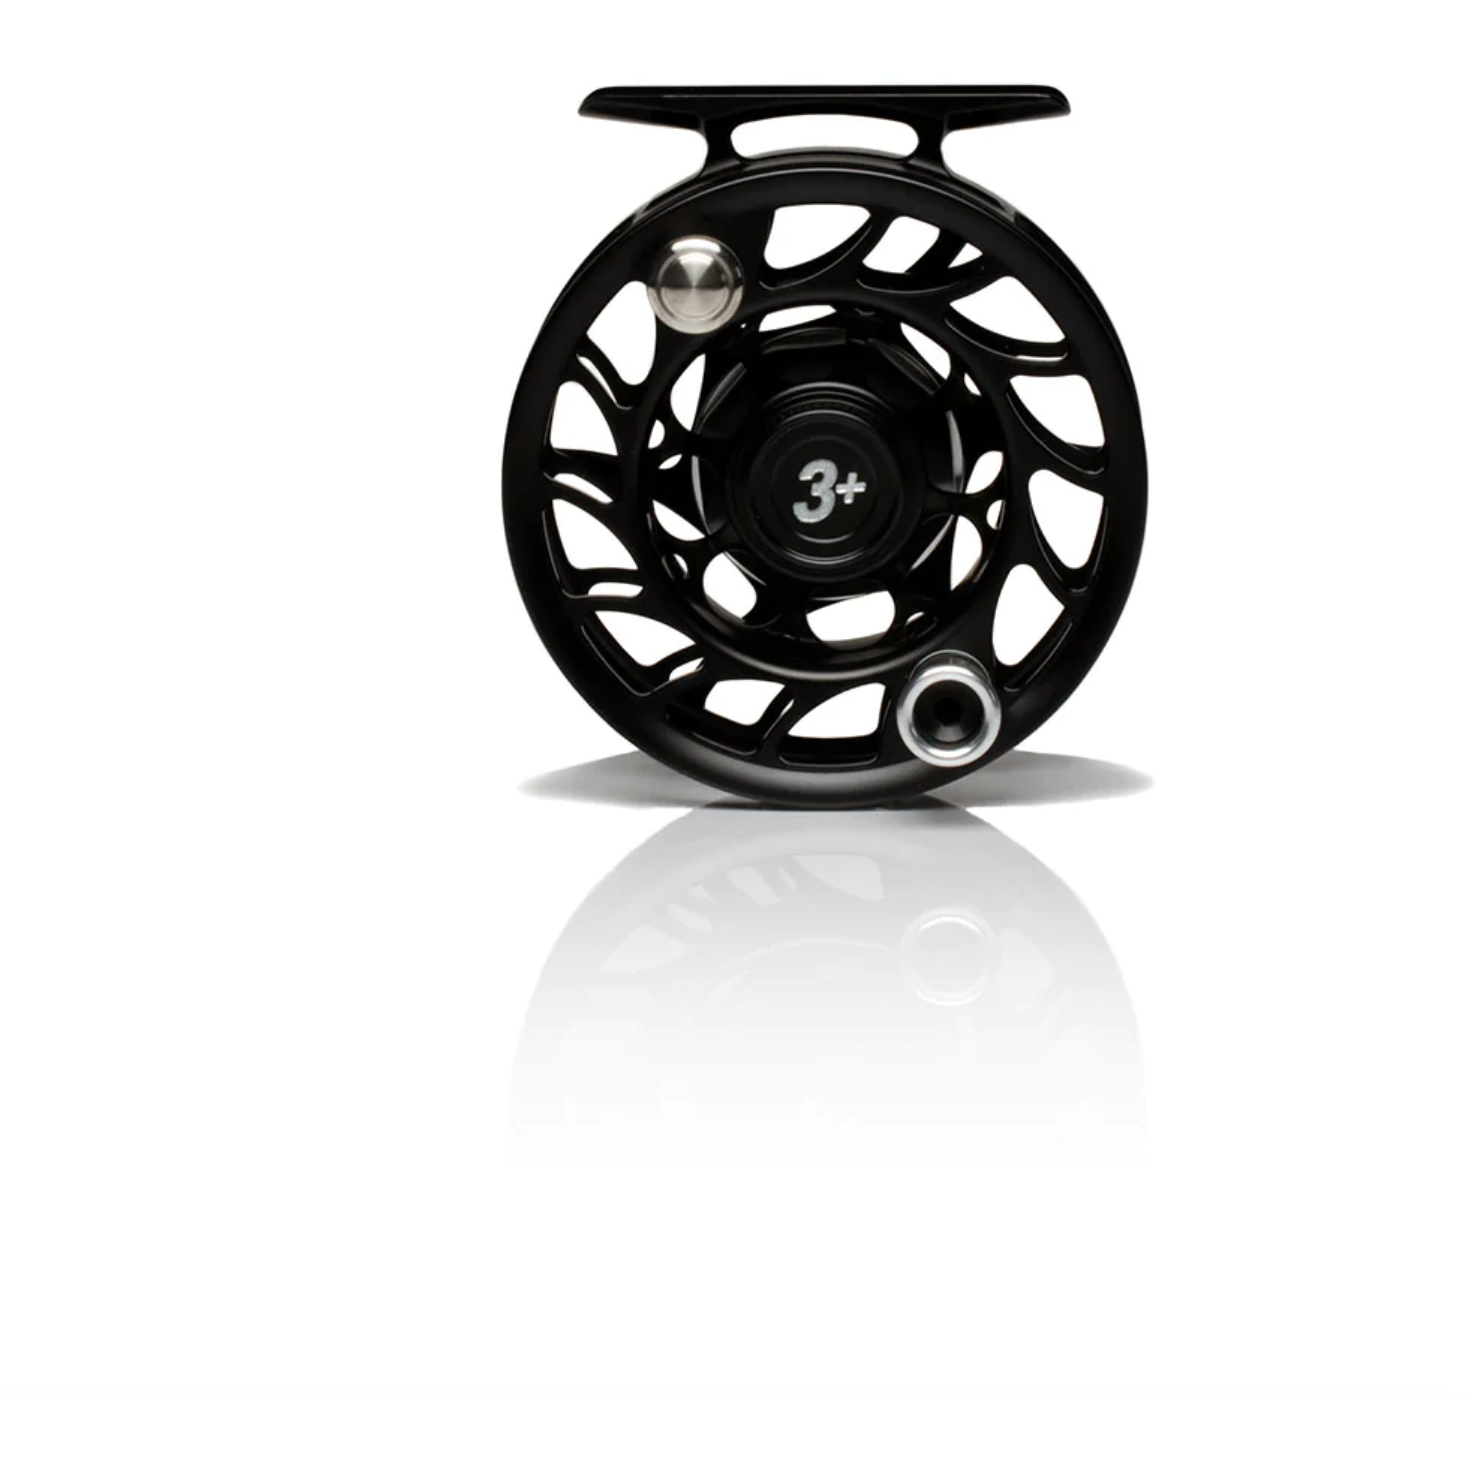 Hatch ICONIC FLY REEL - 3 PLUS